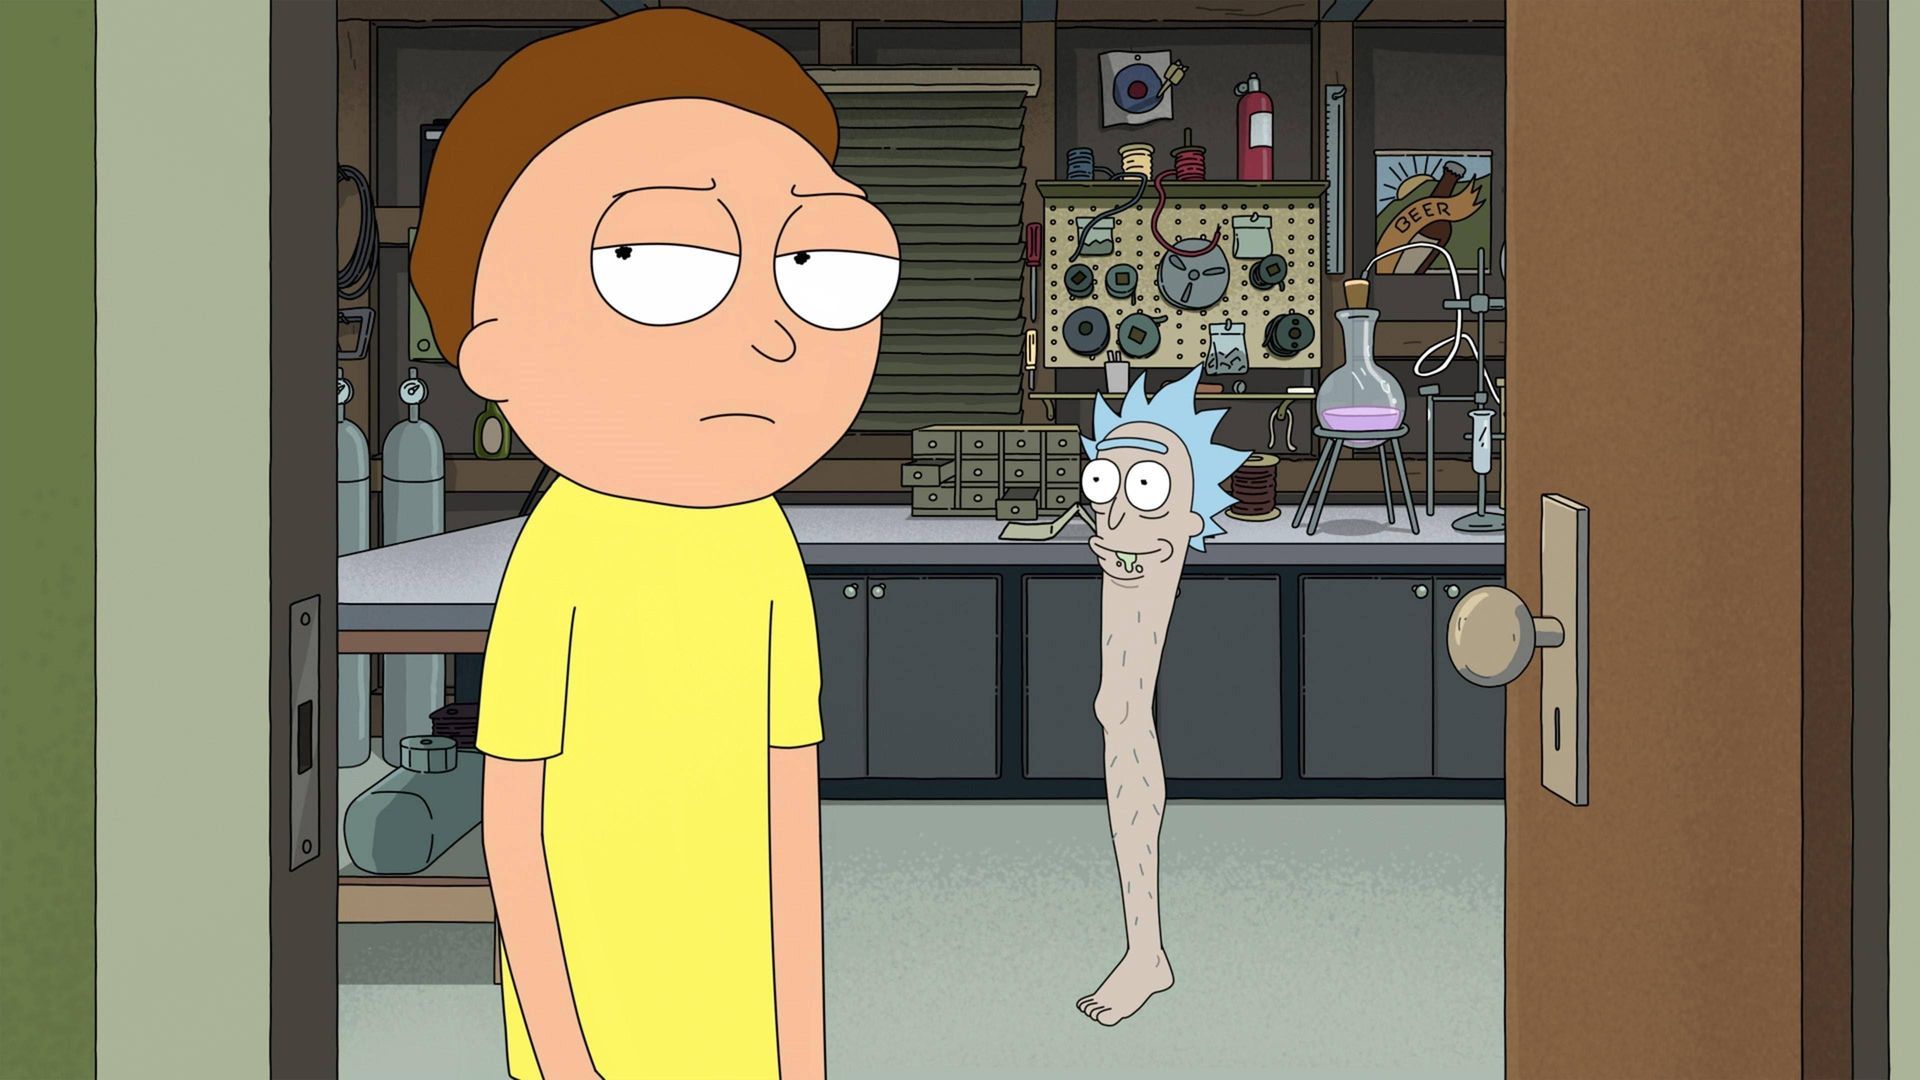 Rick and Morty' Season 7 Episode 7 free live stream: How to watch